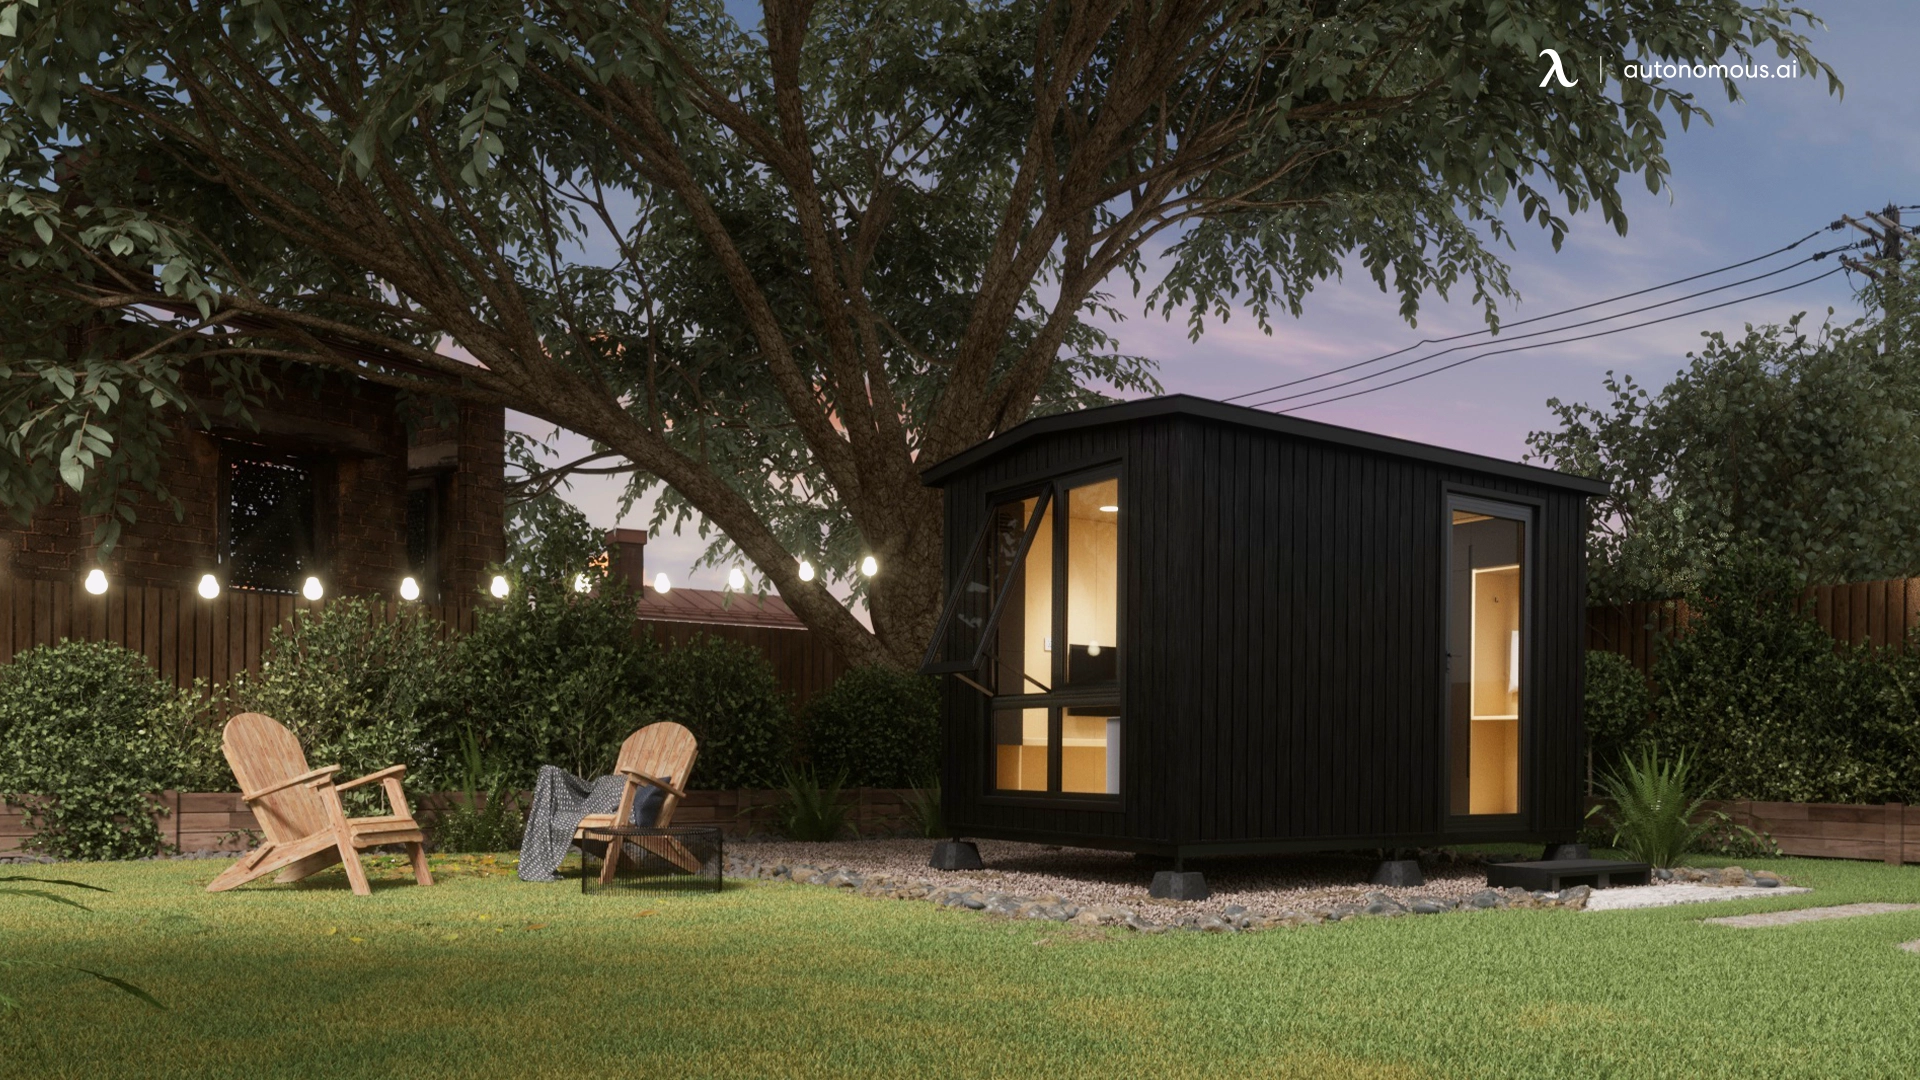 How Much Does It Cost to Build a Tiny House?